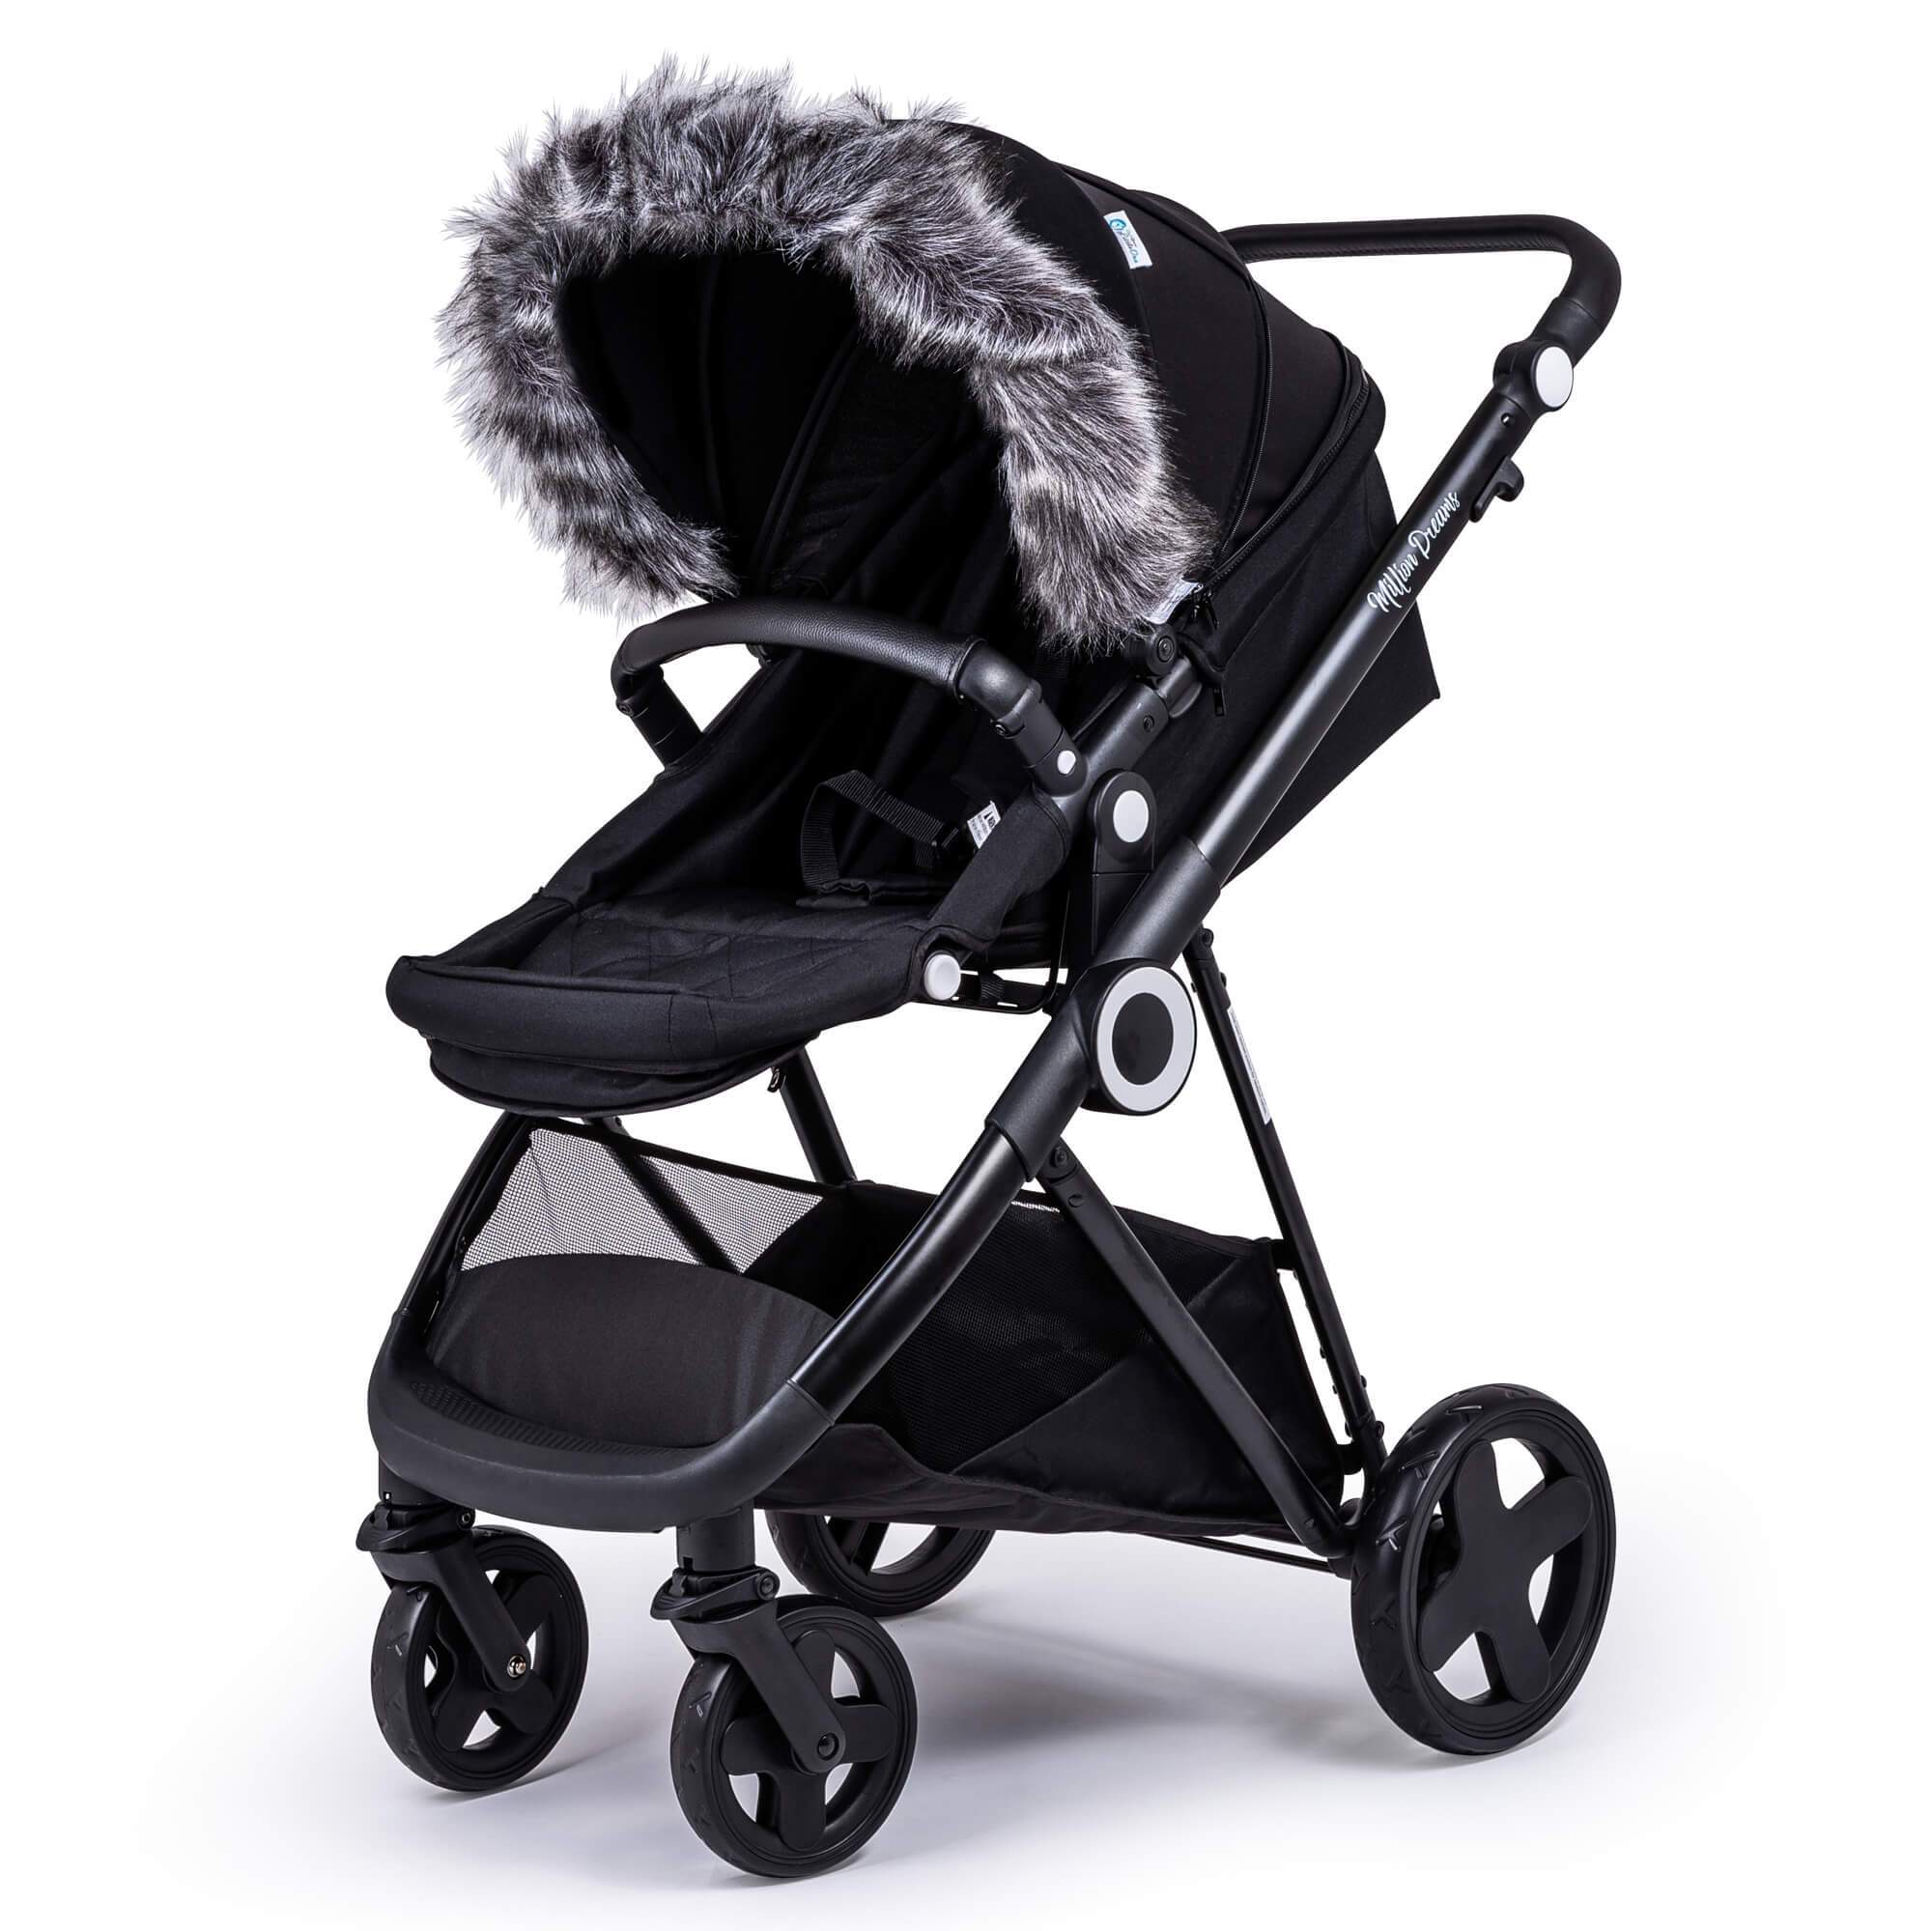 Pram Fur Hood Trim Attachment for Pushchair Compatible with Bebecar - Dark Grey / Fits All Models | For Your Little One